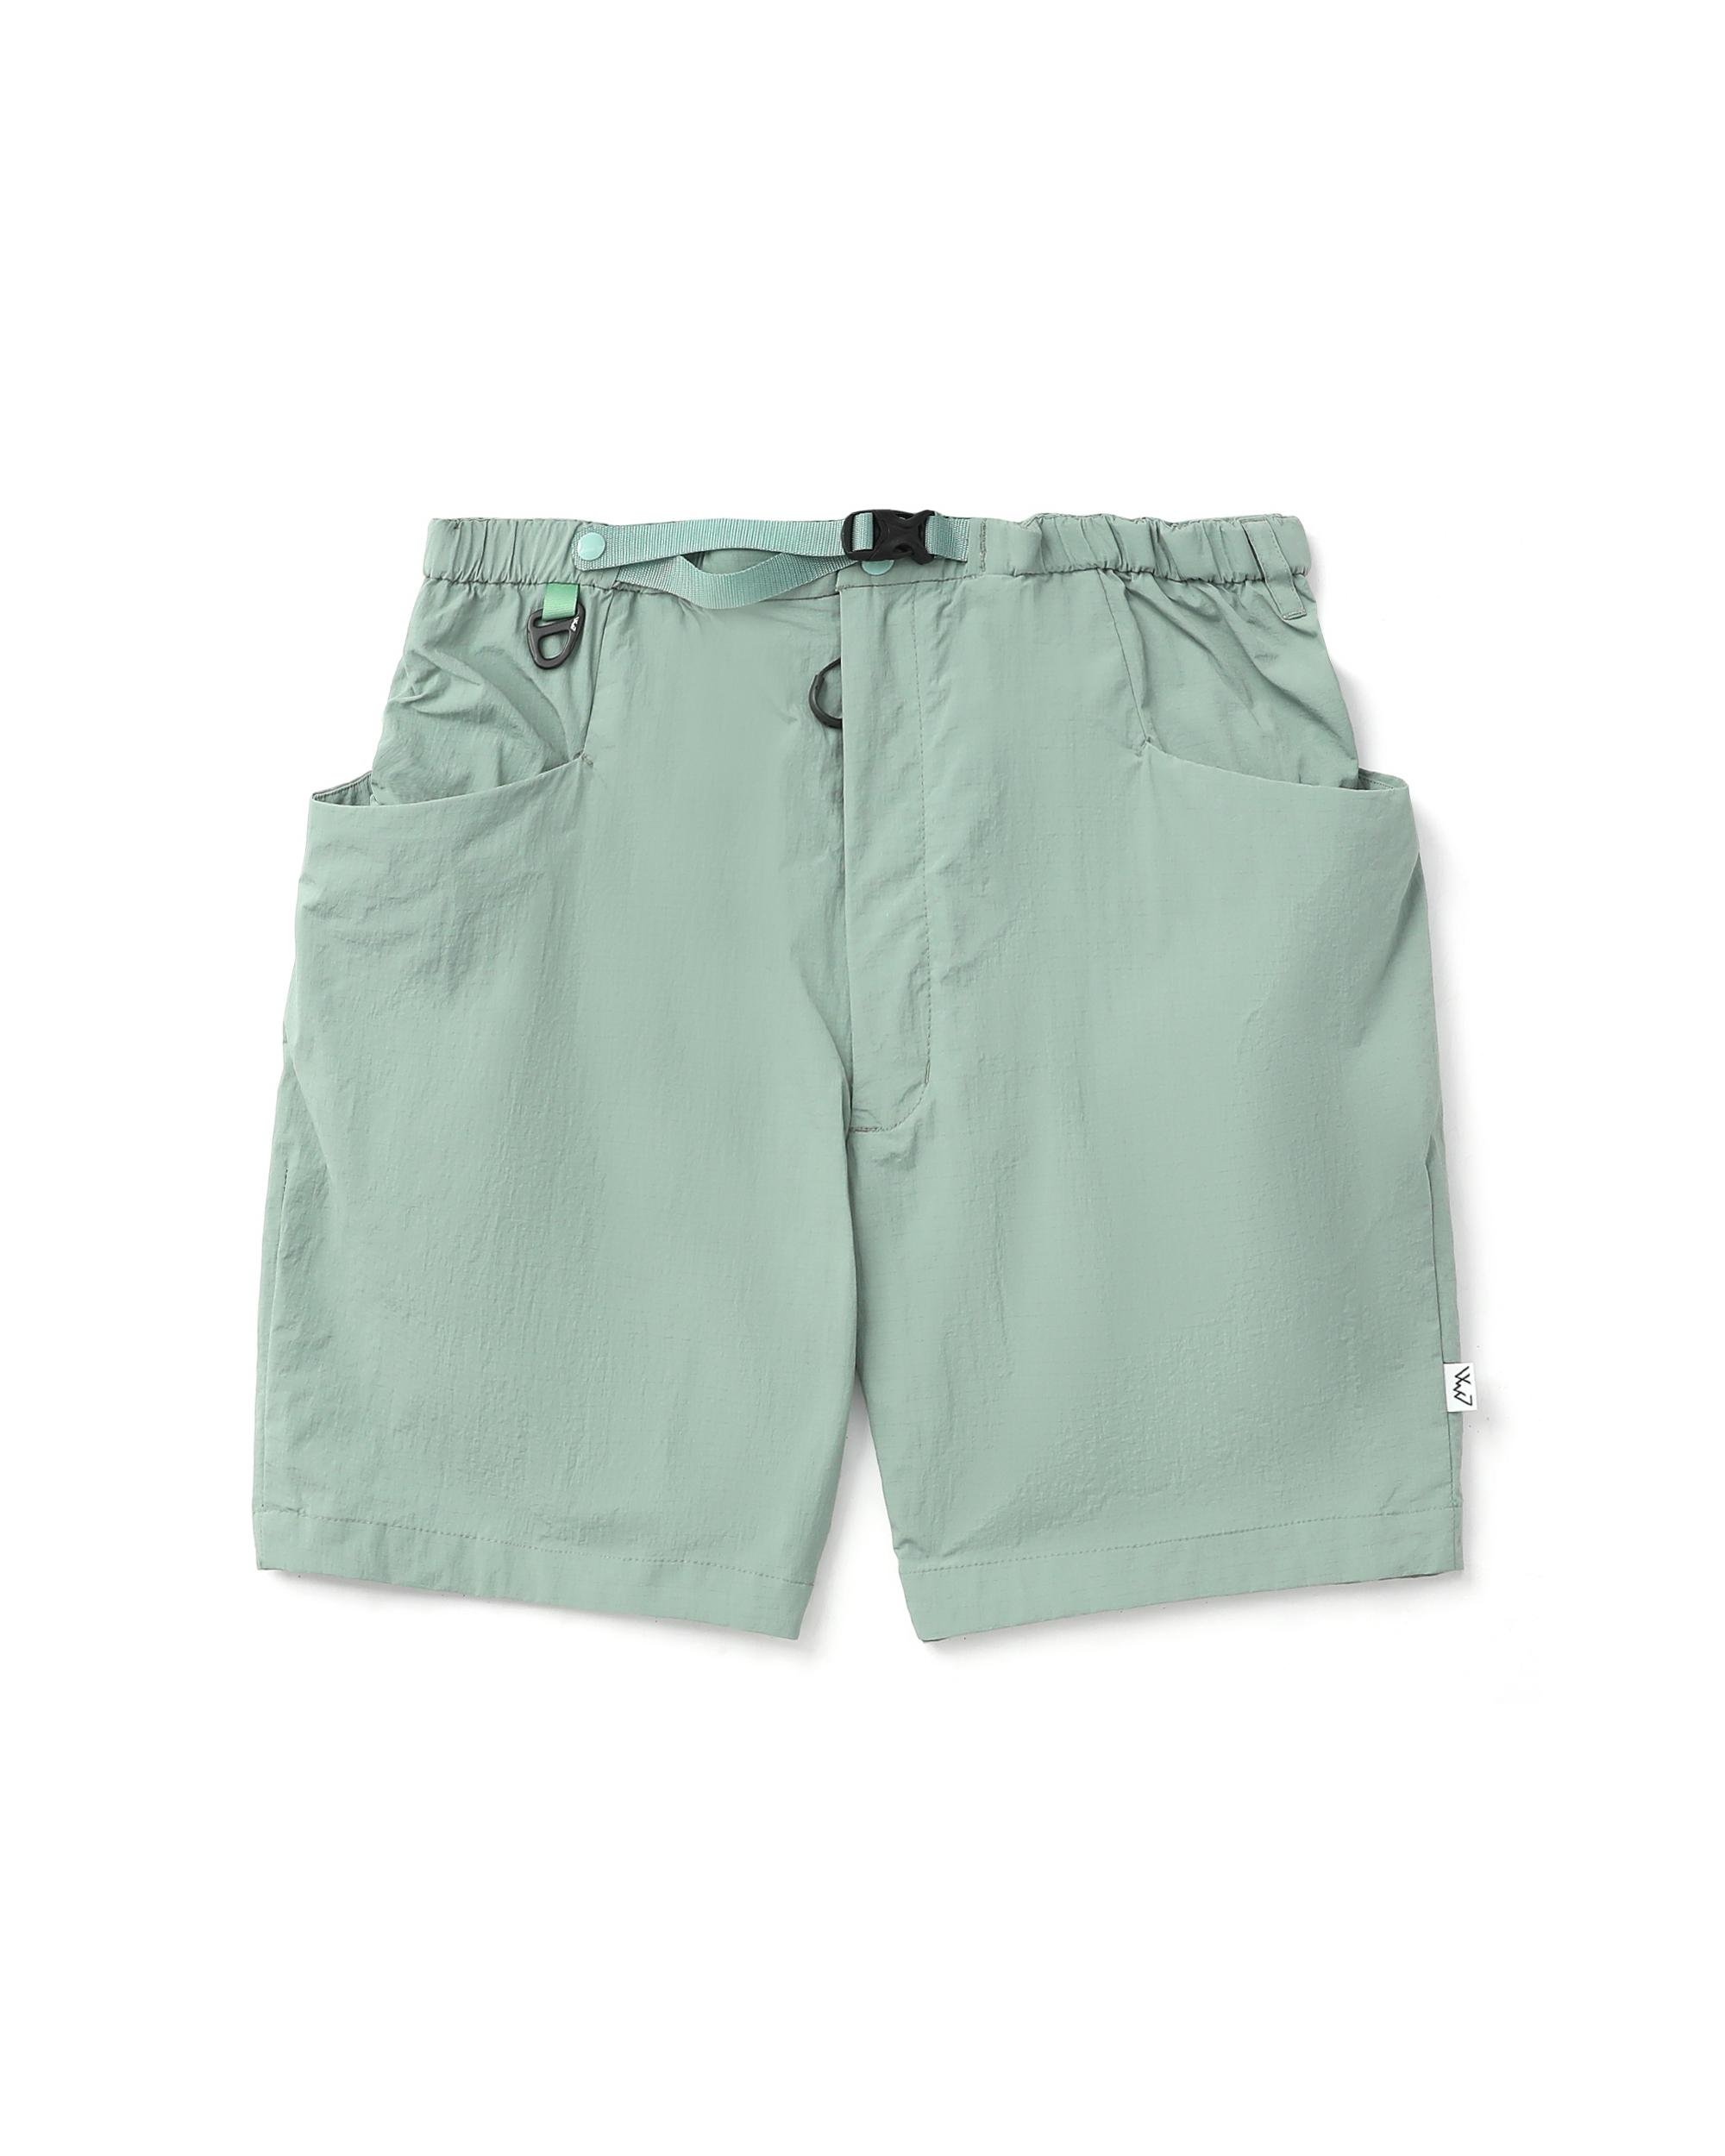 Belted shorts by COMFY OUTDOOR GARMENT